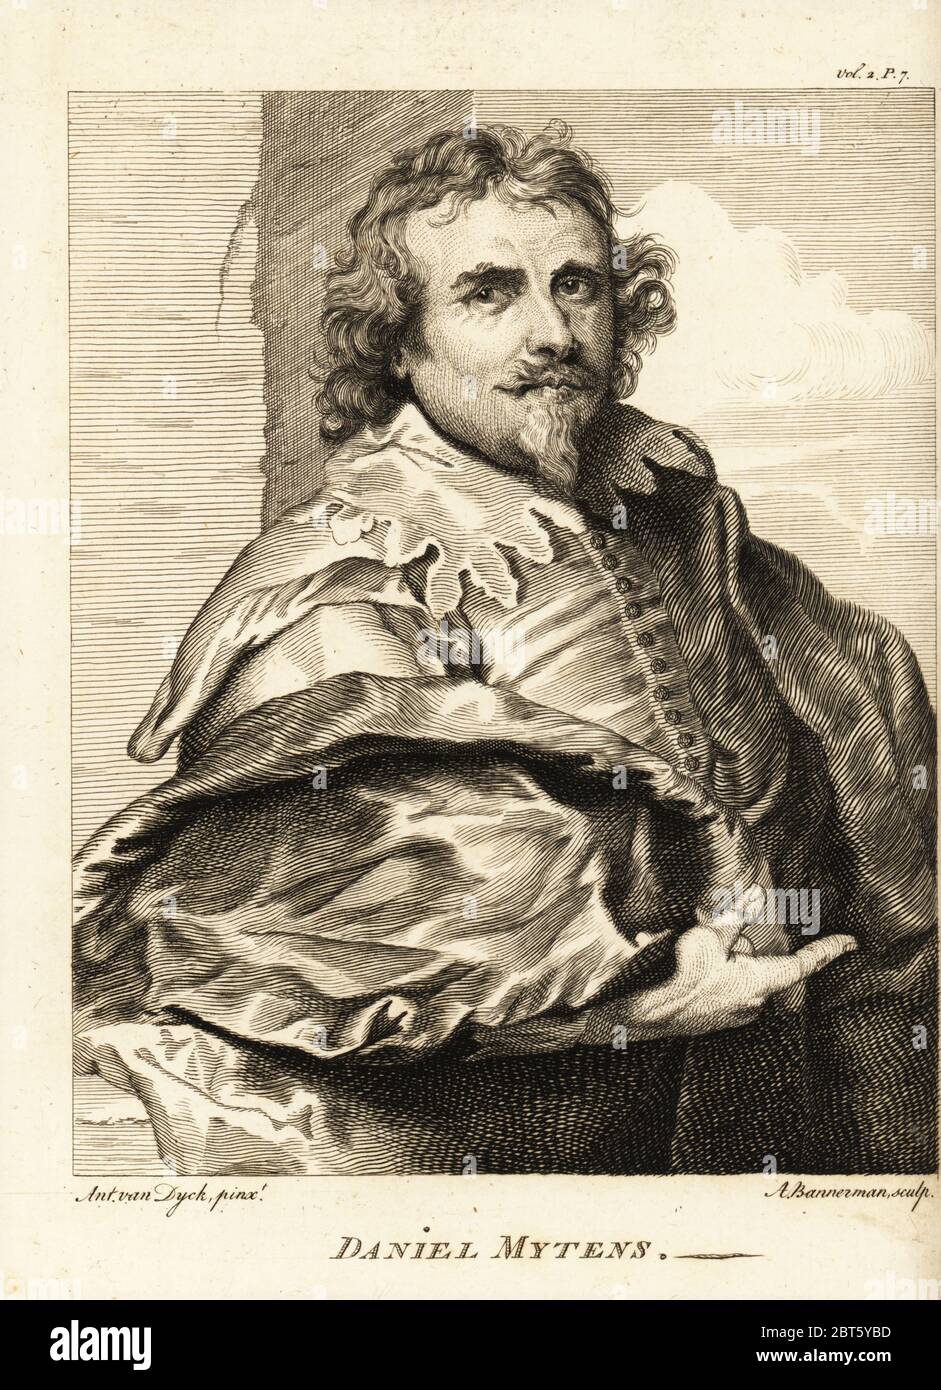 Portrait of Daniel Mytens the Elder or Daniël Mijtens, Dutch portrait painter who worked in England, c.1590-1648. Copperplate engraving by Alexander Bannerman after a portrait by Anthony van Dyck from Horace Walpole’s Anecdotes of Painting in England, London, 1765. Stock Photo